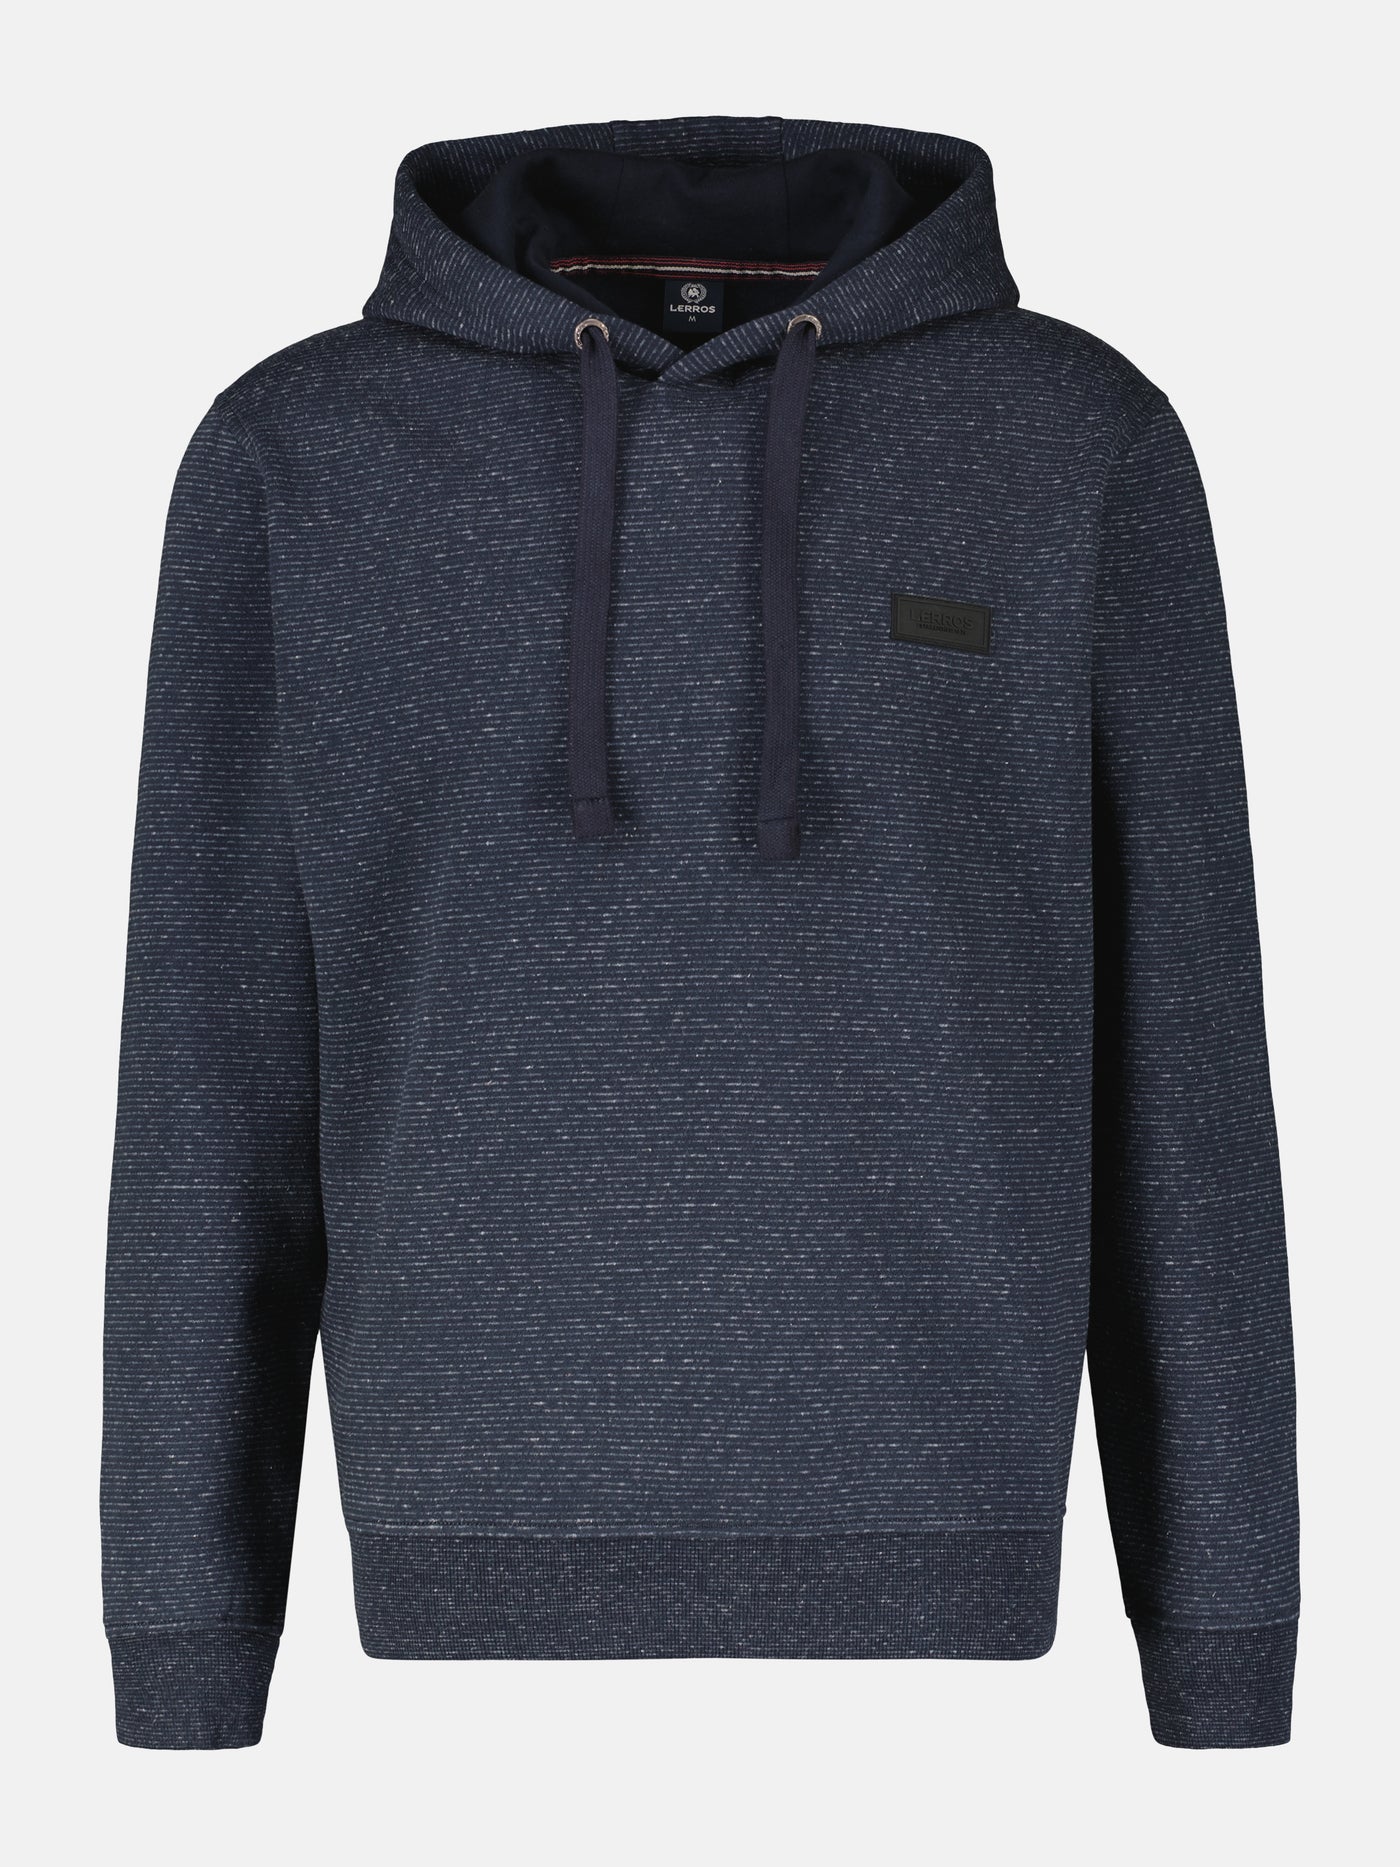 Sweat hoodie in a soft, structured quality